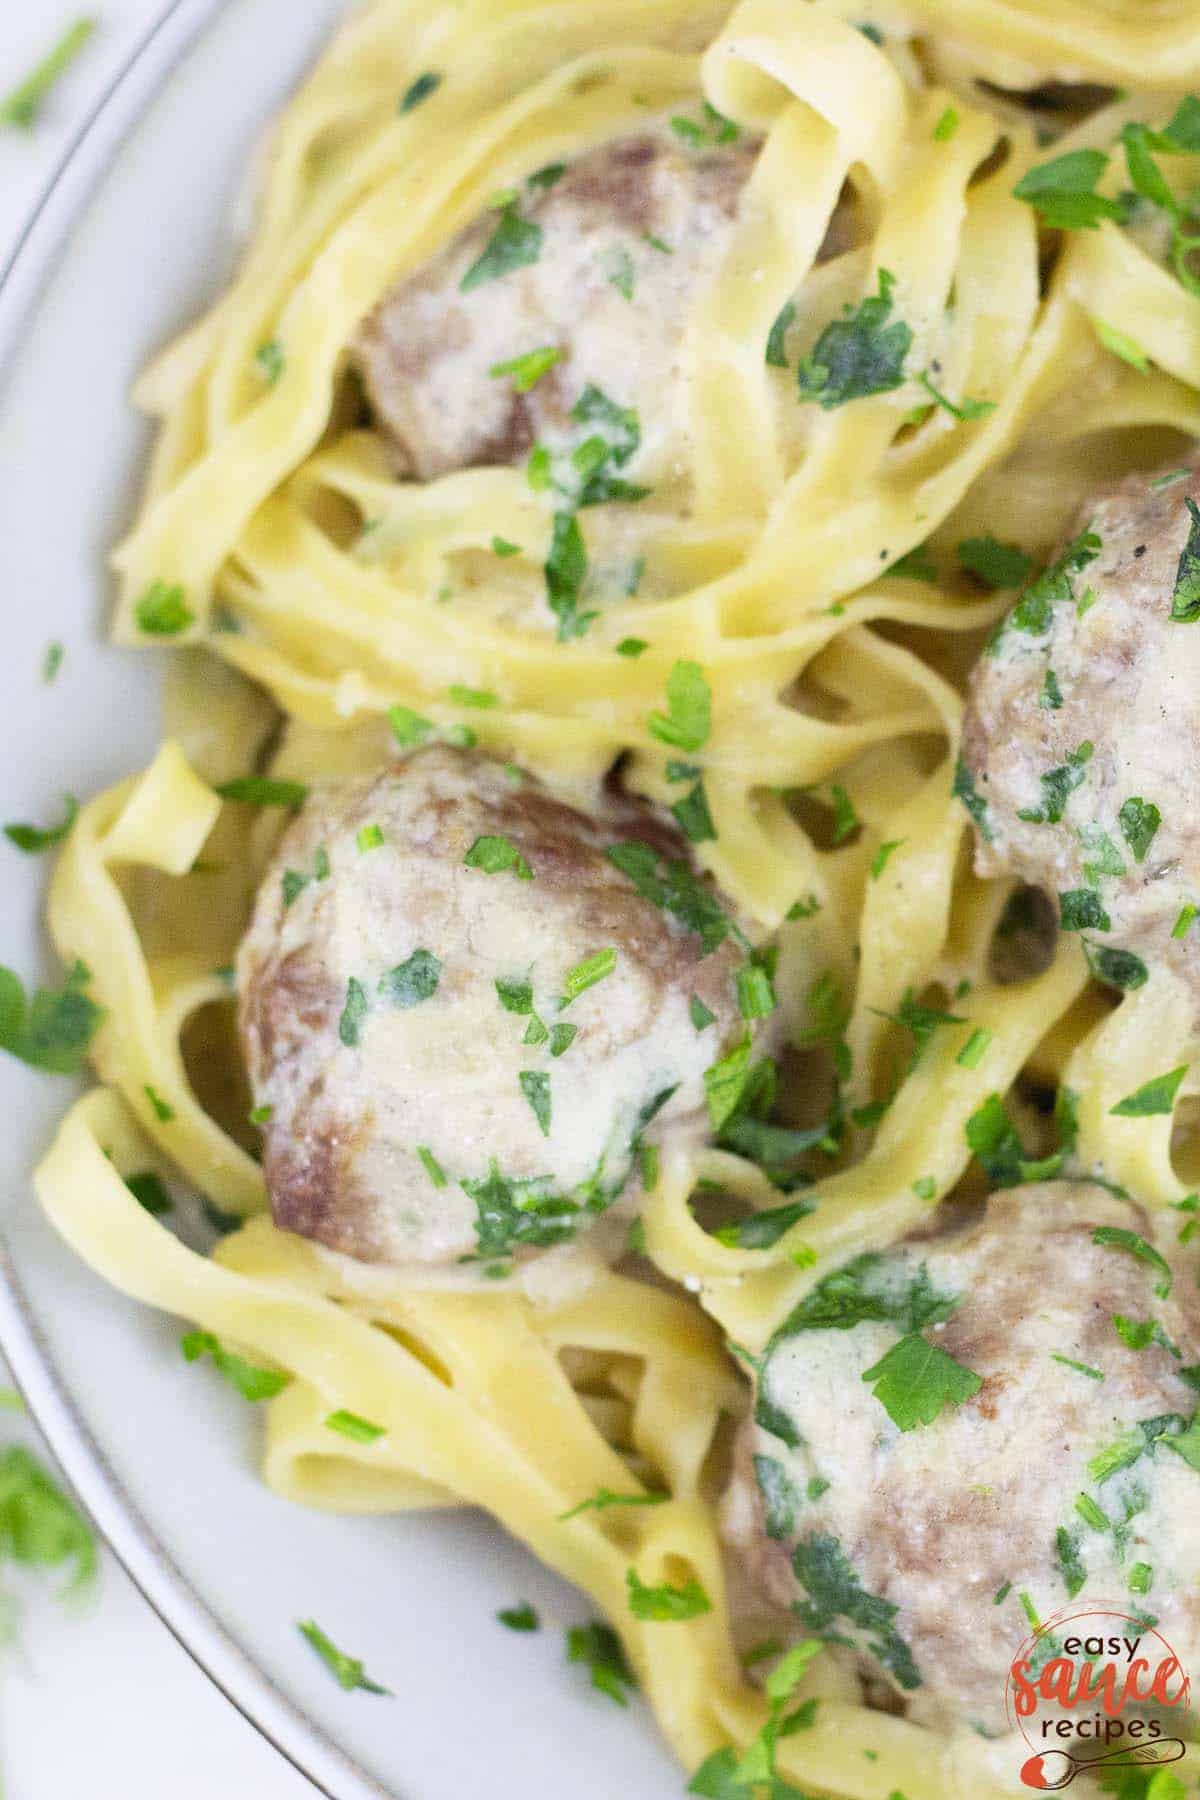 swedish meatballs topped with parmesan and parsley over noodles